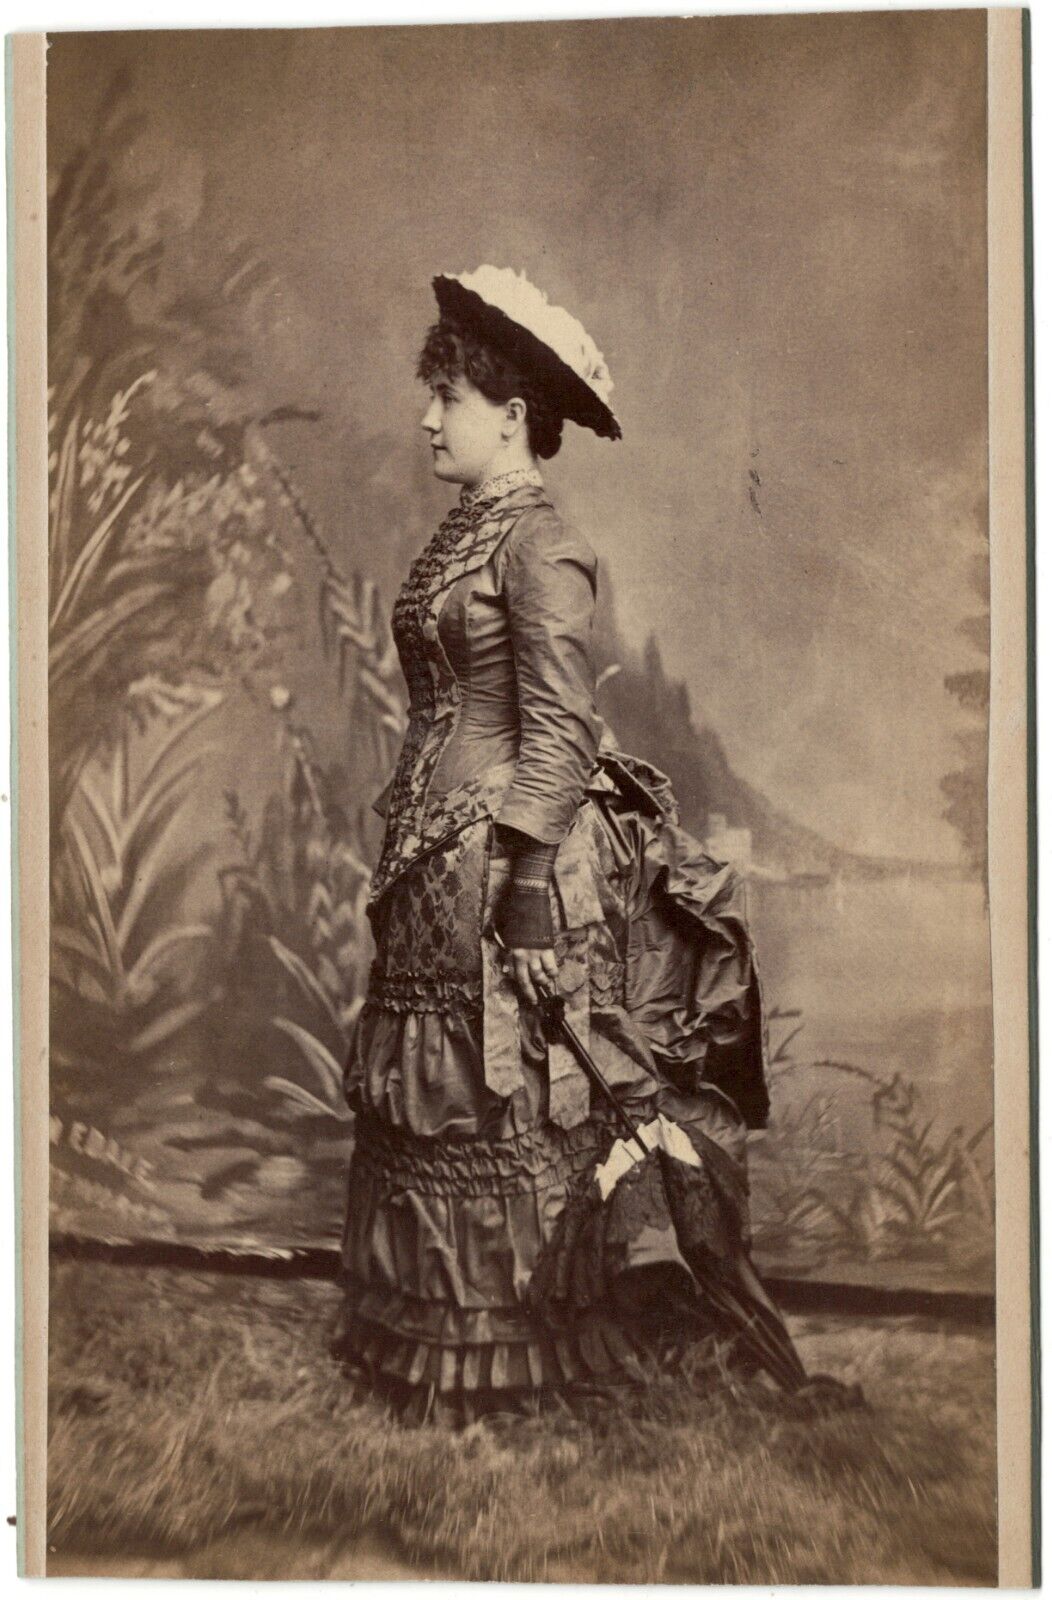 Amazing 1880s Victorian Era Lady in Dress and Hat - Imprint on Back 4x6 in.